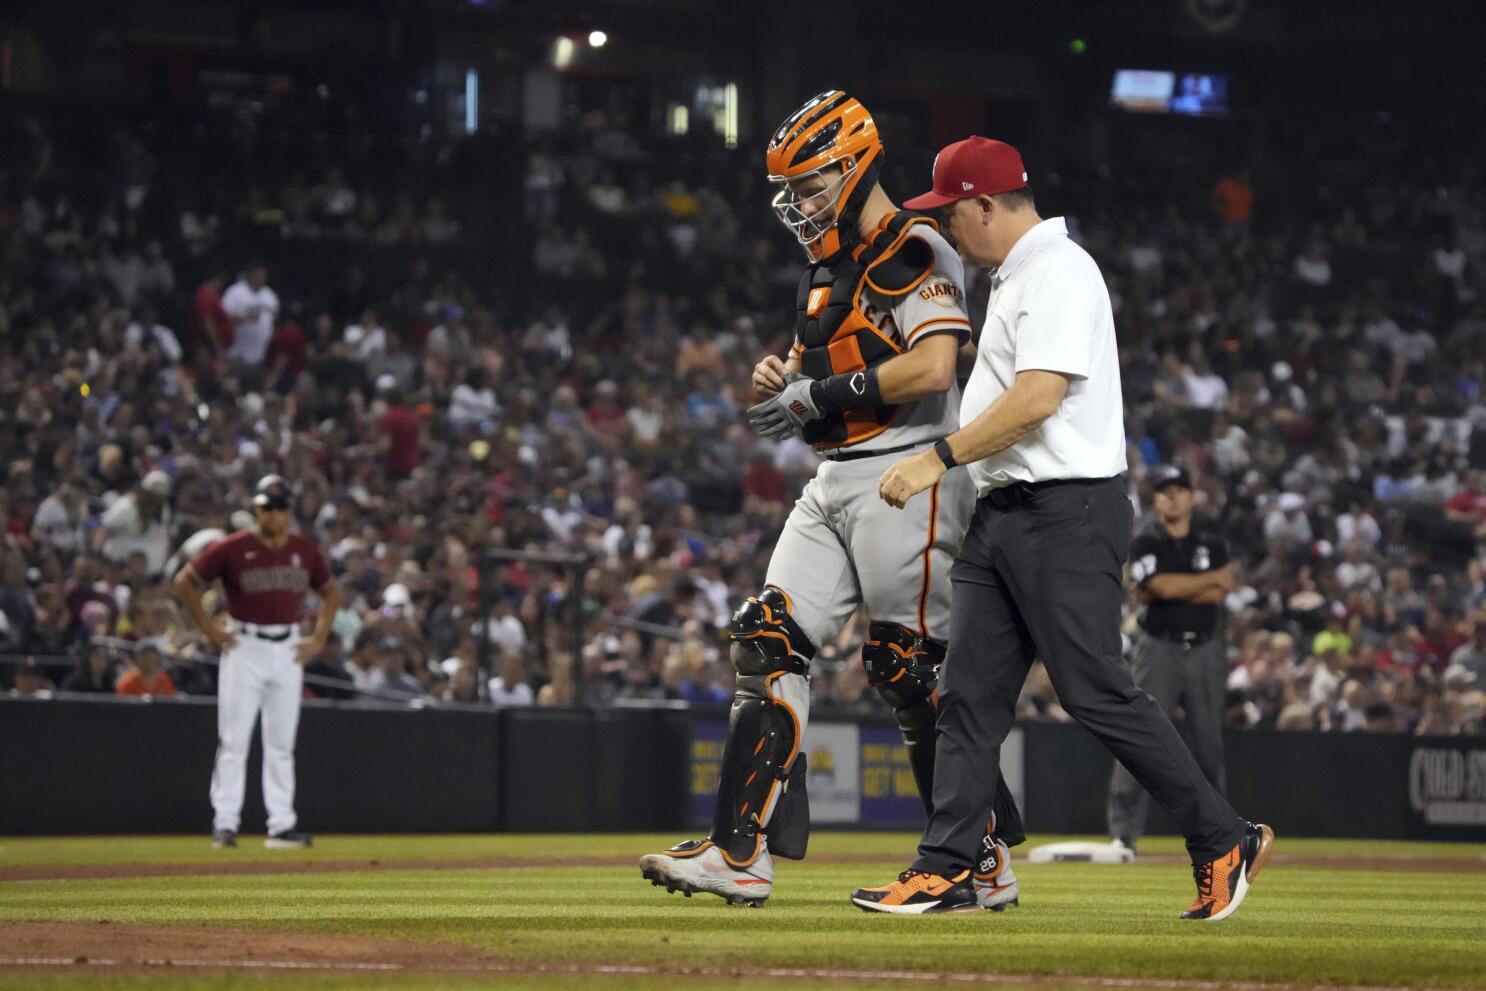 Giants catcher Posey misses All-Star Game with bruised thumb